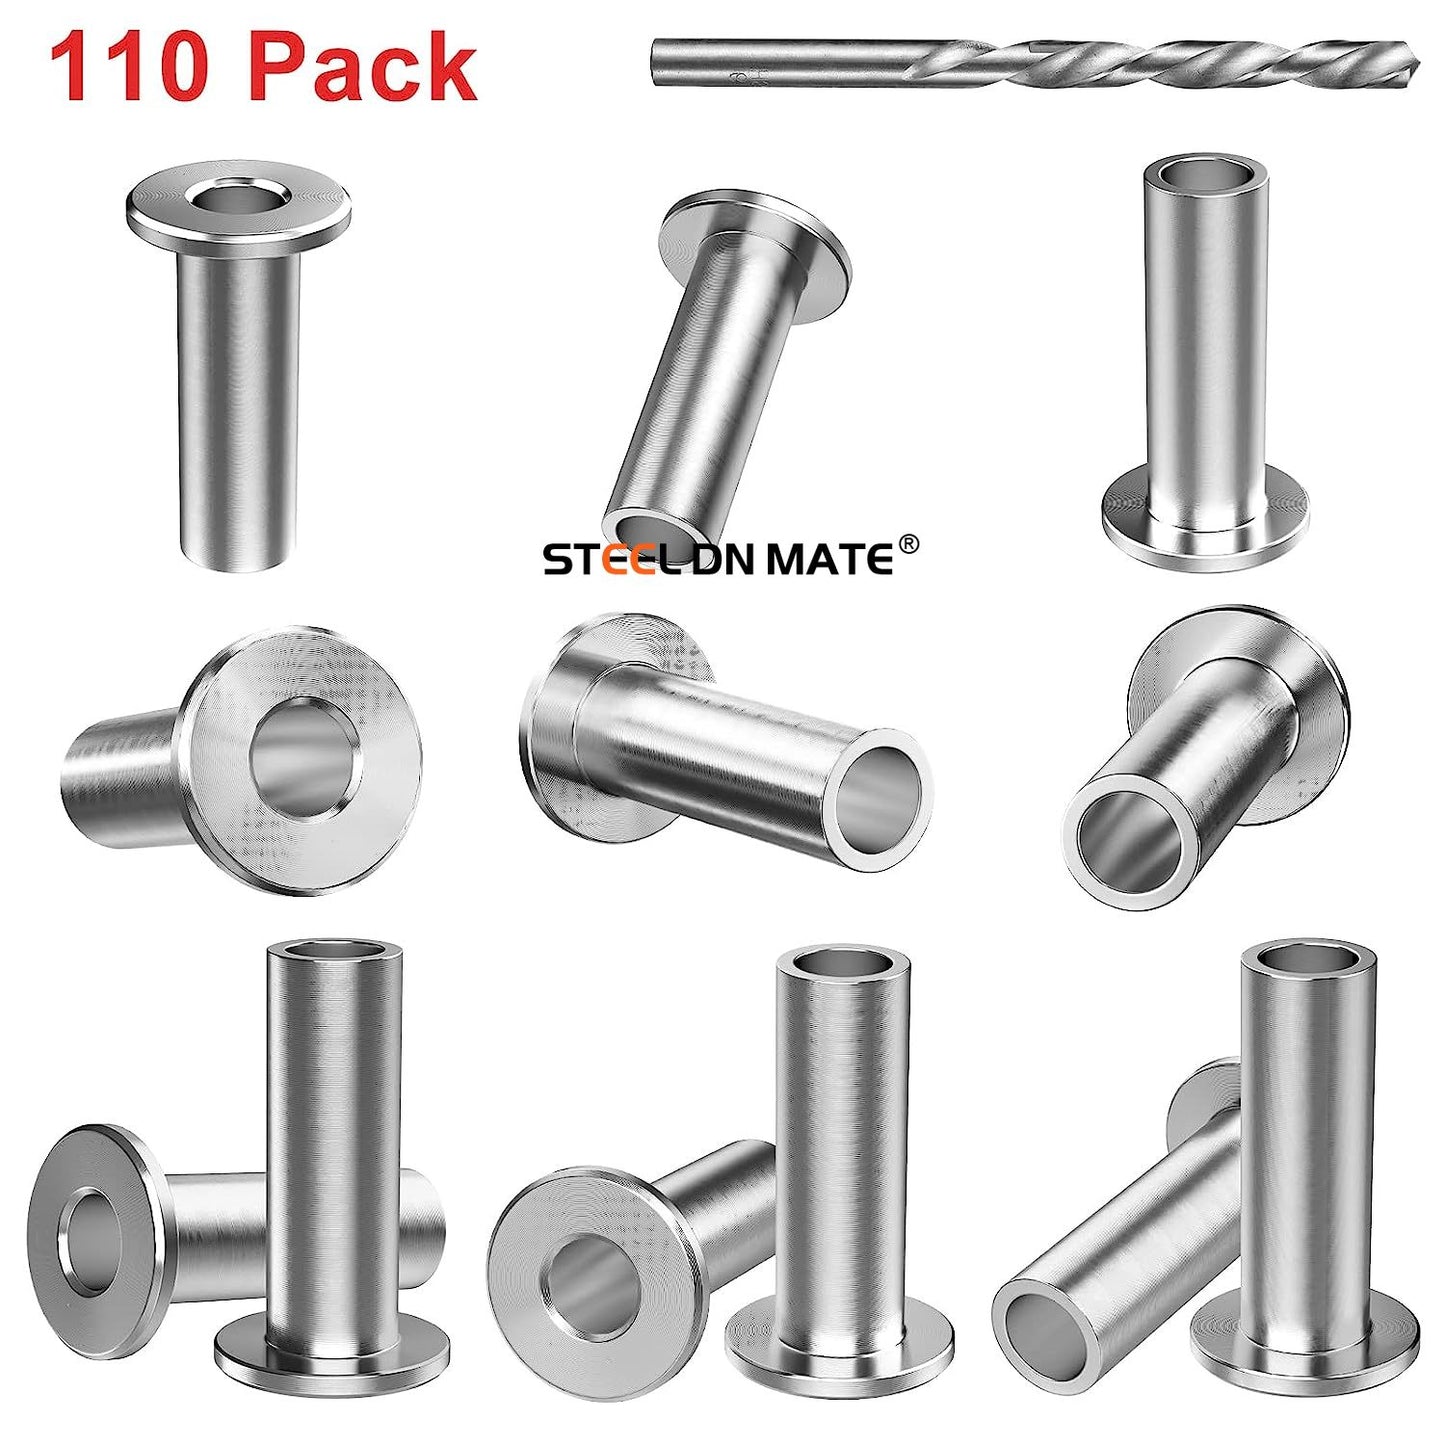 Steel DN Mate 110 Pack T316 Stainless Steel Protector Sleeves for 1/8" Cable Railing, Cable Protector Sleeves for Cable Railing System, Deck Railing Hardware with a Drill Bit DE11